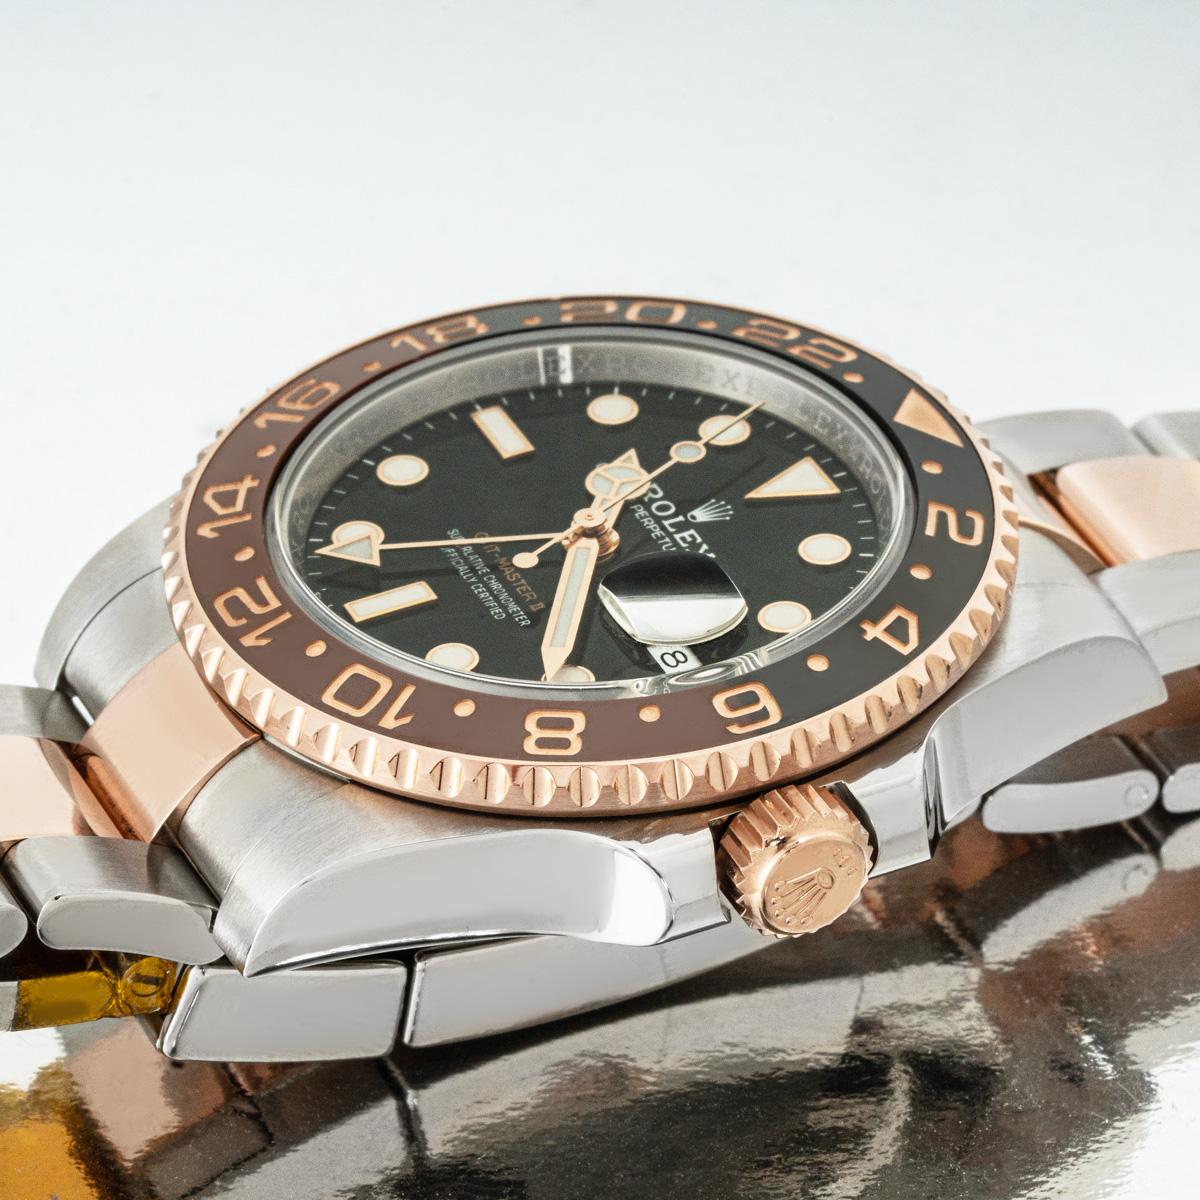 An GMT-Master II Root Beer in Oystersteel and rose gold from Rolex, featuring a black dial with the date and second time zone hand. The two colour black and brown ceramic bidirectional rotatable bezel features a 24 hour display.

The Oyster bracelet